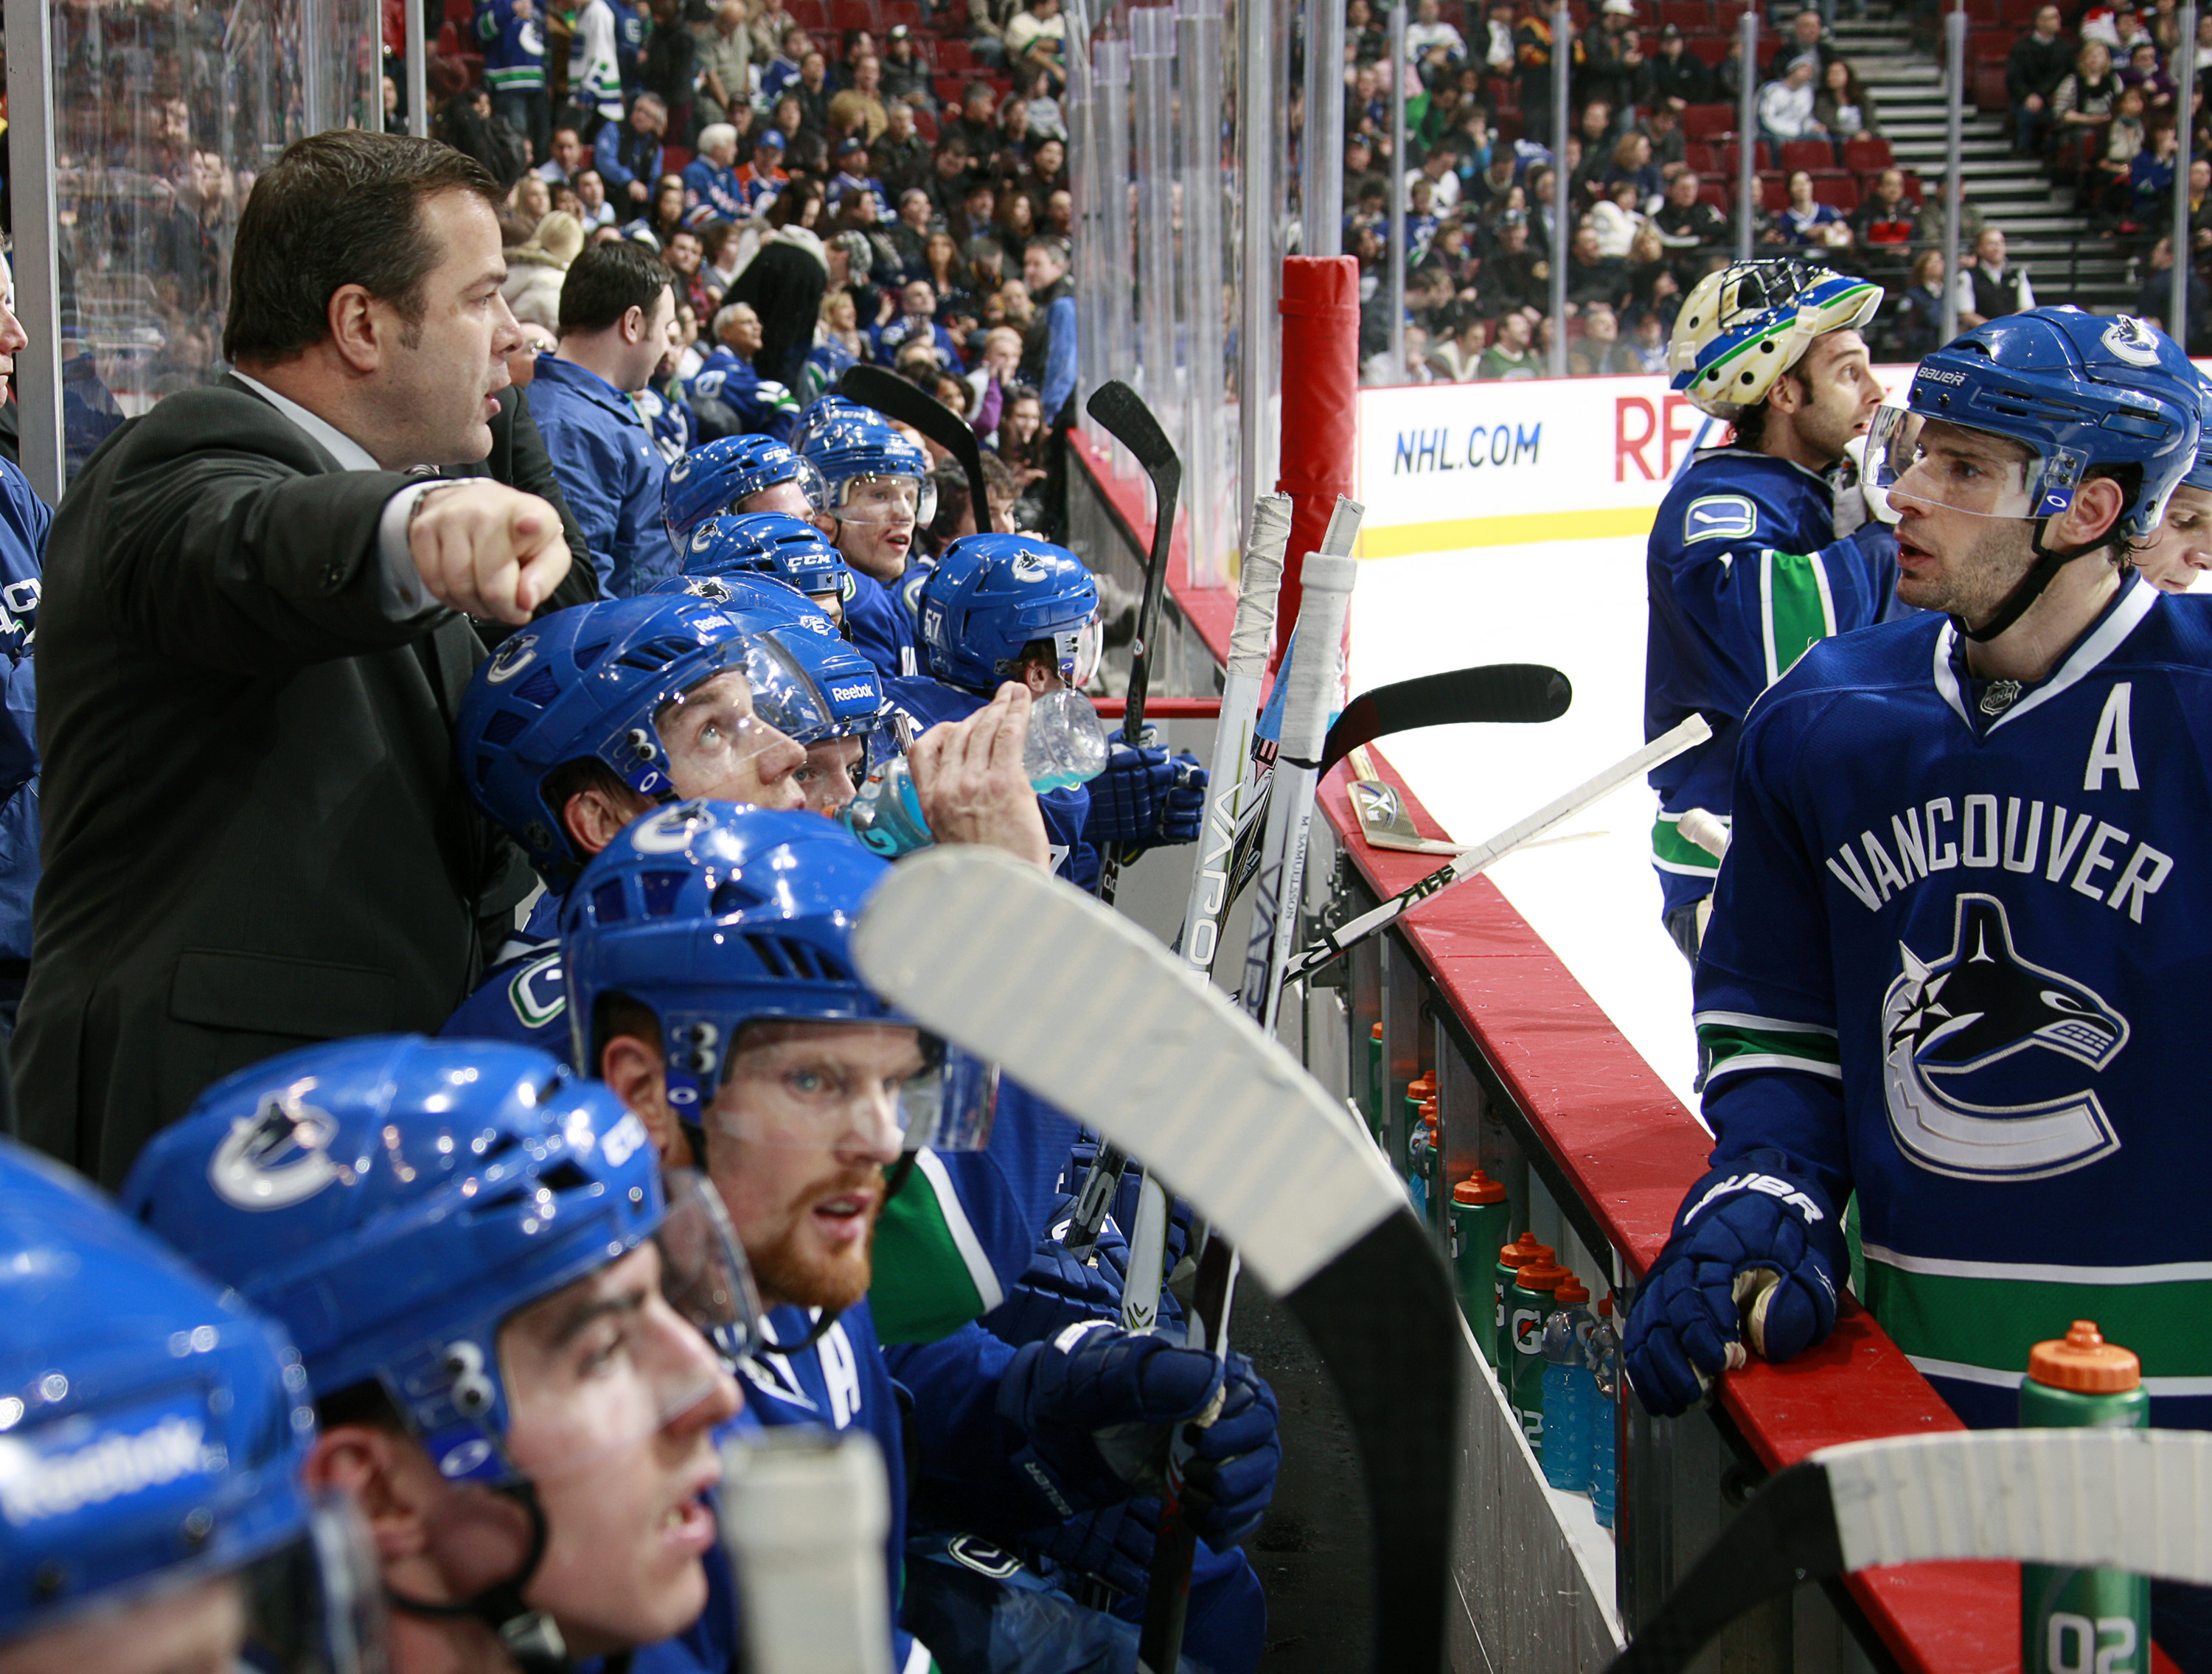 VANCOUVER, CANADA - JANUARY 26: Head coach Alain Vigneault of the Vancouver Canucks talks to Ryan Kesler #17 during their game against the Nashville Predators at Rogers Arena on January 26, 2011 in Vancouver, British Columbia, Canada. Vancouver won 2-1. (Photo by Jeff Vinnick/NHLI via Getty Images)